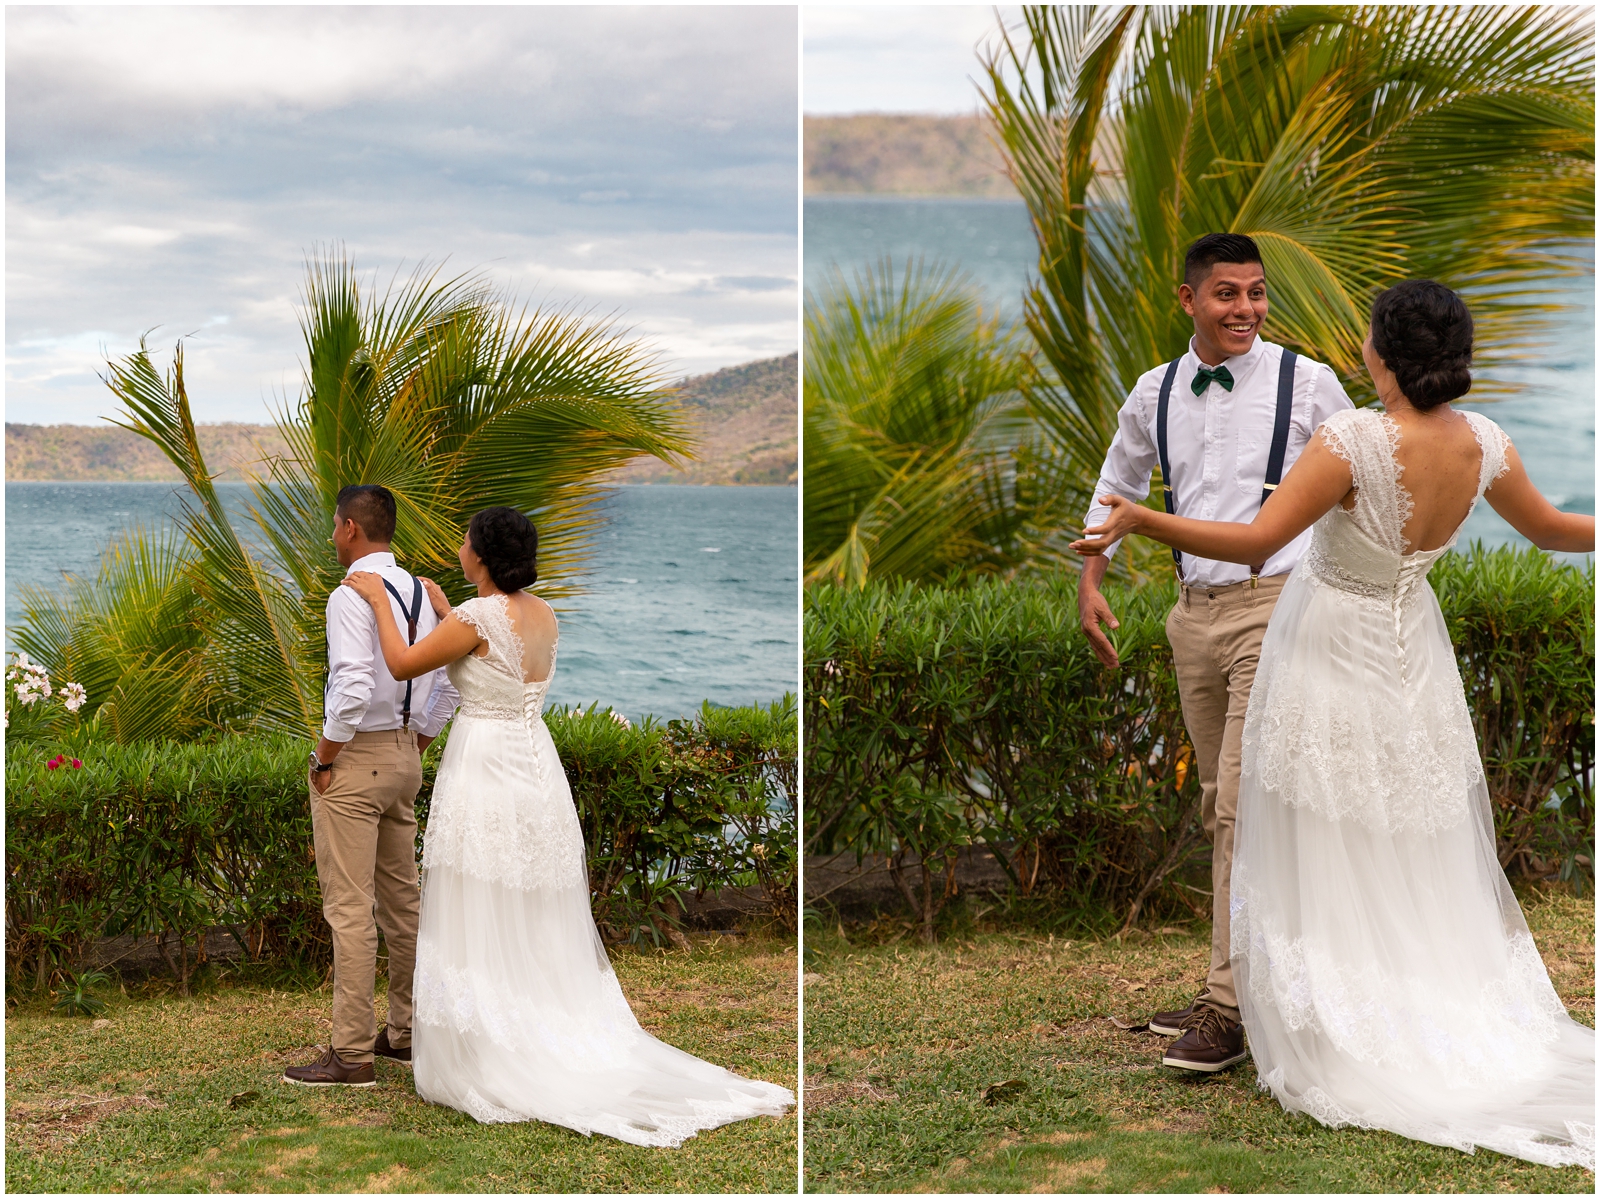 This couple's first look before their Nicaragua adventure wedding.